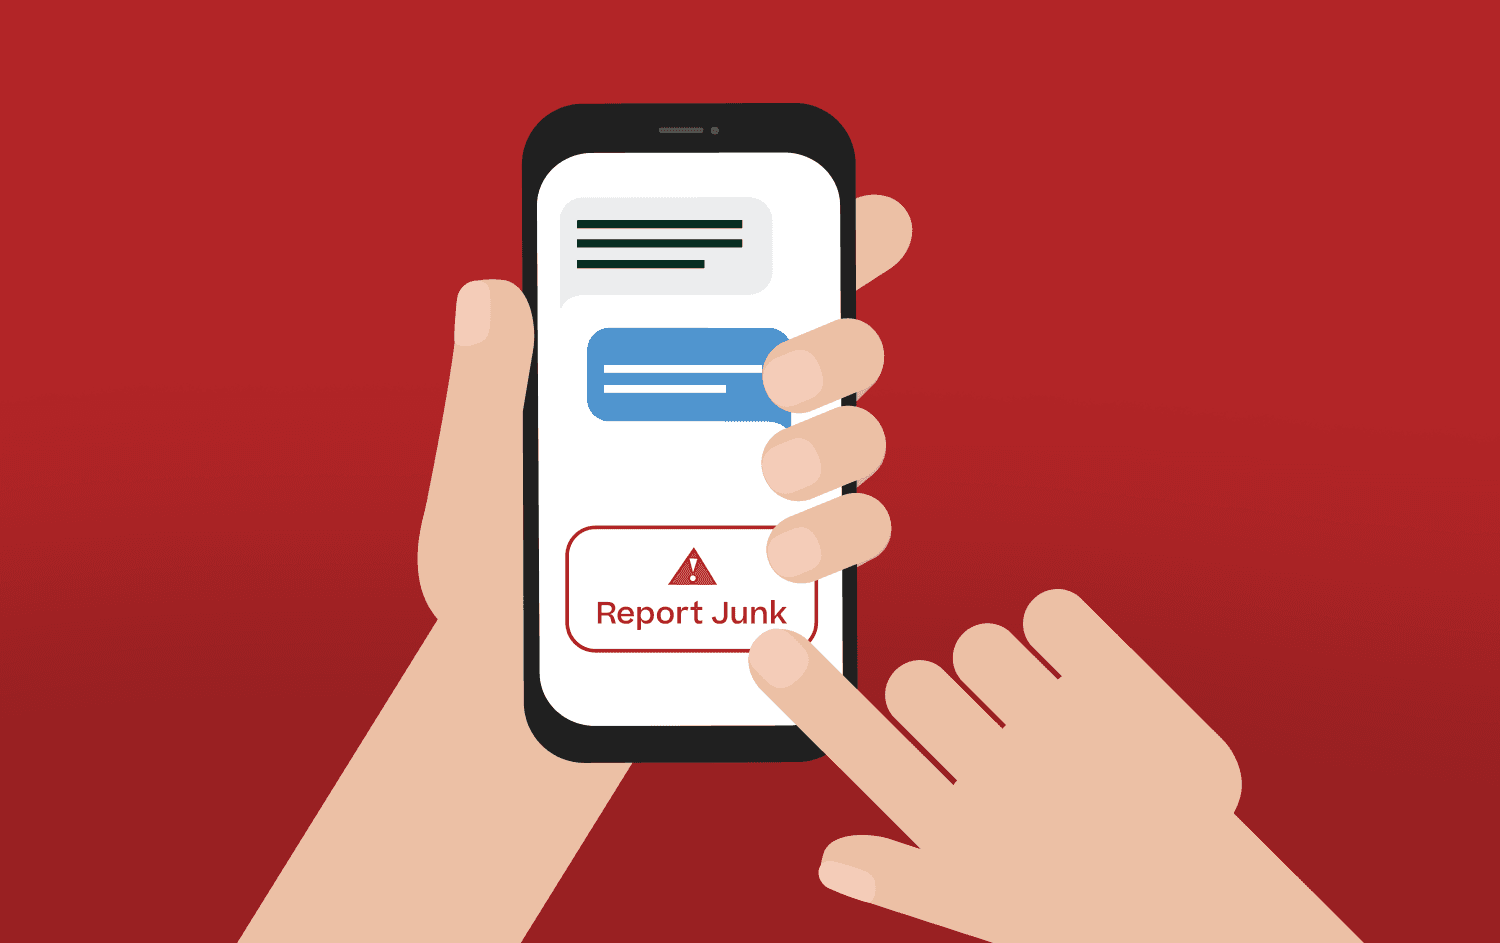 Cartoon representation of a text message conversation with the “Report Junk” option highlighted